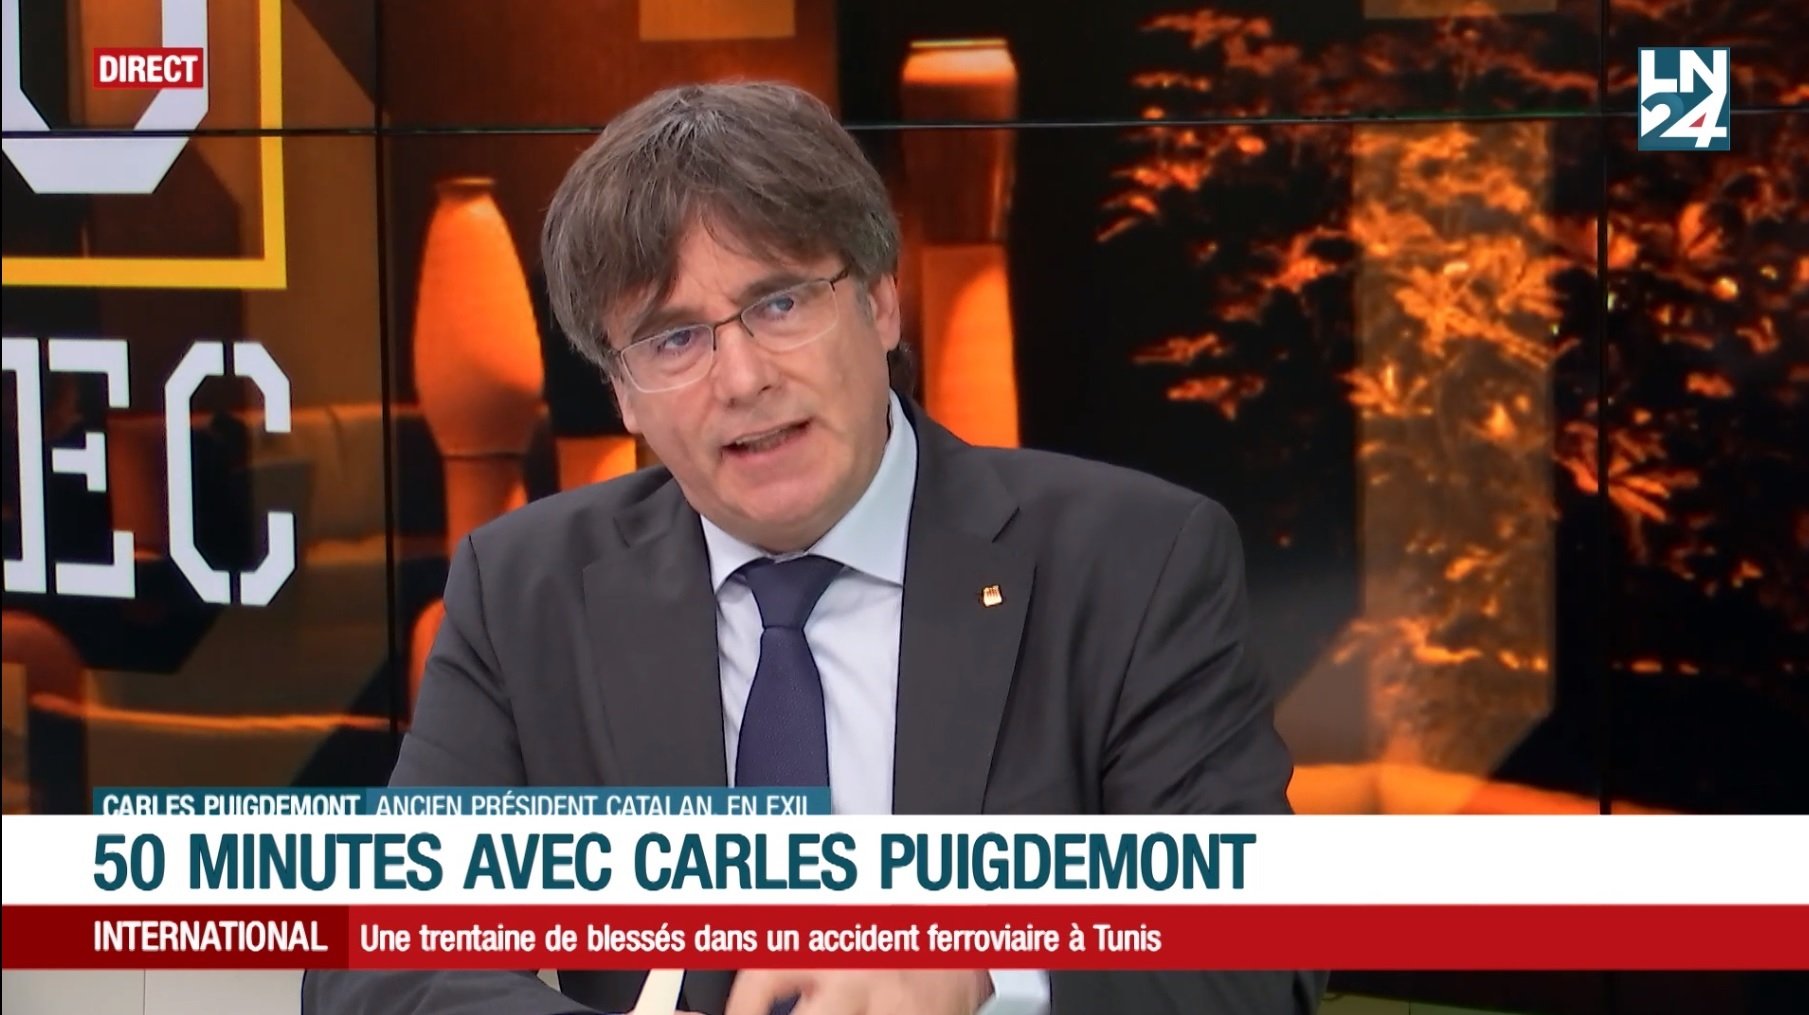 Puigdemont: "If we hold fast, which we didn't do 4 years ago, they'll recognize us"